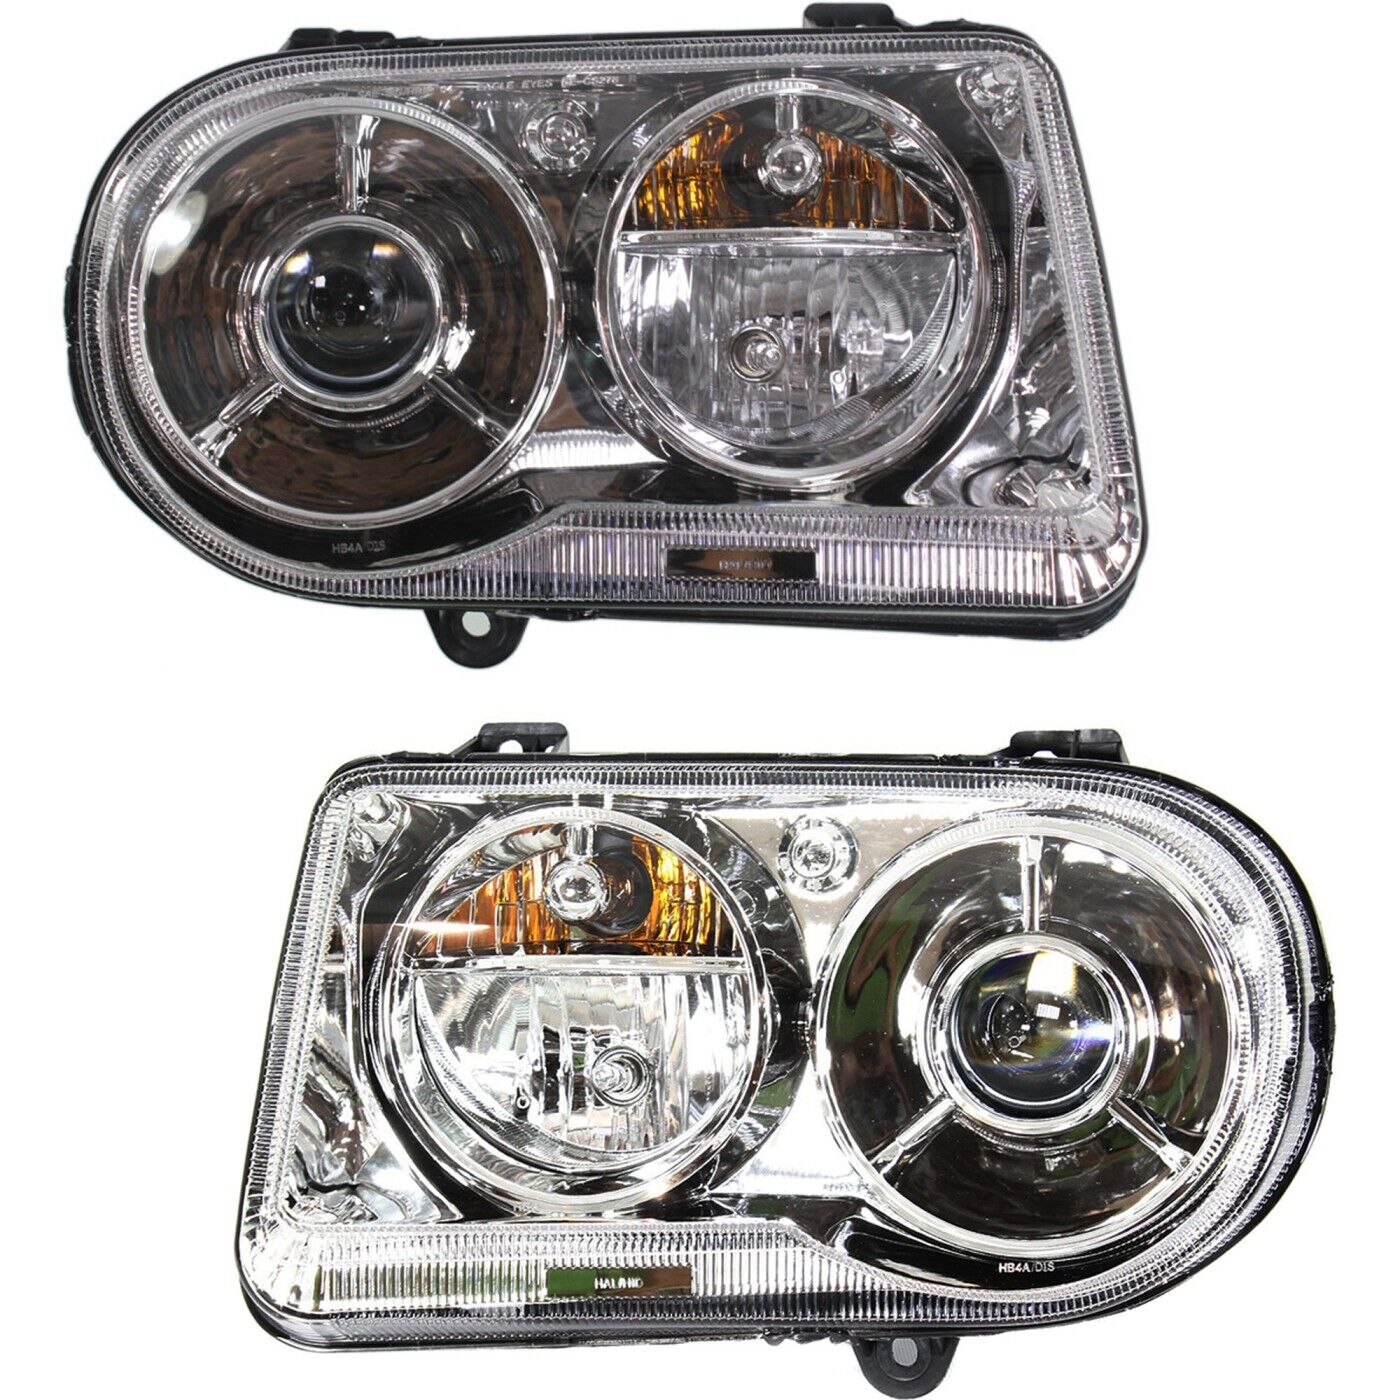 Headlight Set For 2005-2010 Chrysler 300 C and C SRT8 Left and Right HID 2Pc